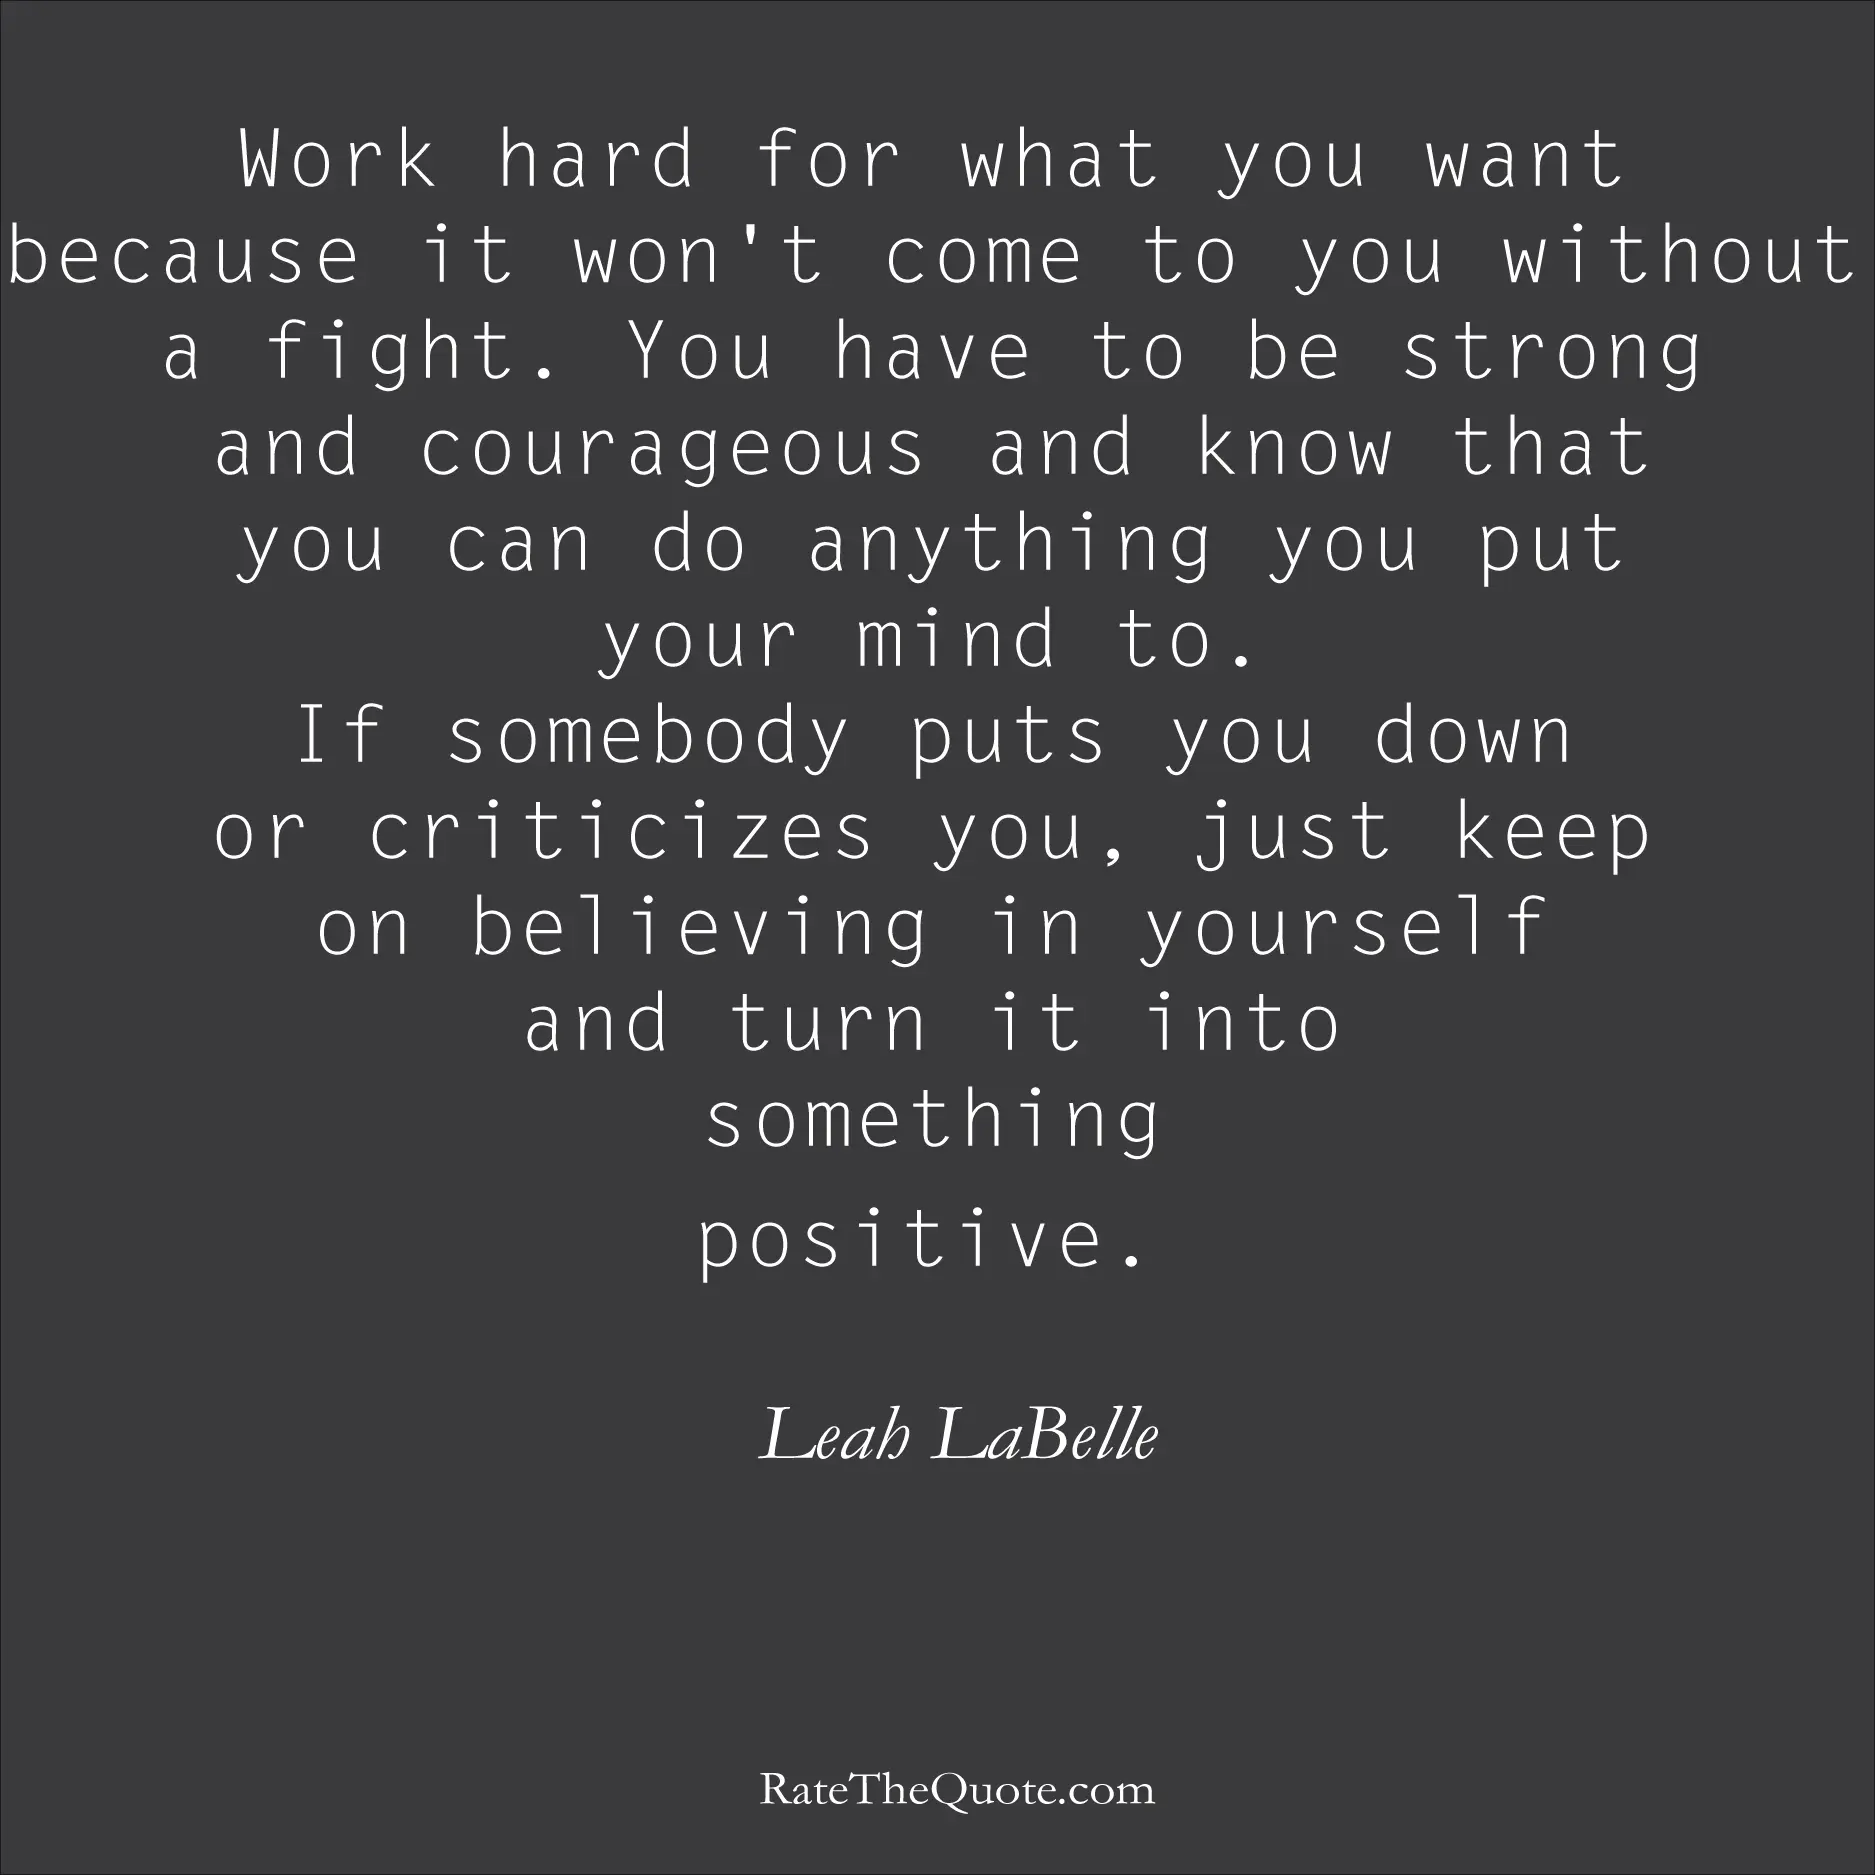 Positive Quotes Work hard for what you want because it won't come to you without a fight. You have to be strong and courageous and know that you can do anything you put your mind to. If somebody puts you down or criticizes you, just keep on believing in yourself and turn it into something positive. Leah LaBelle